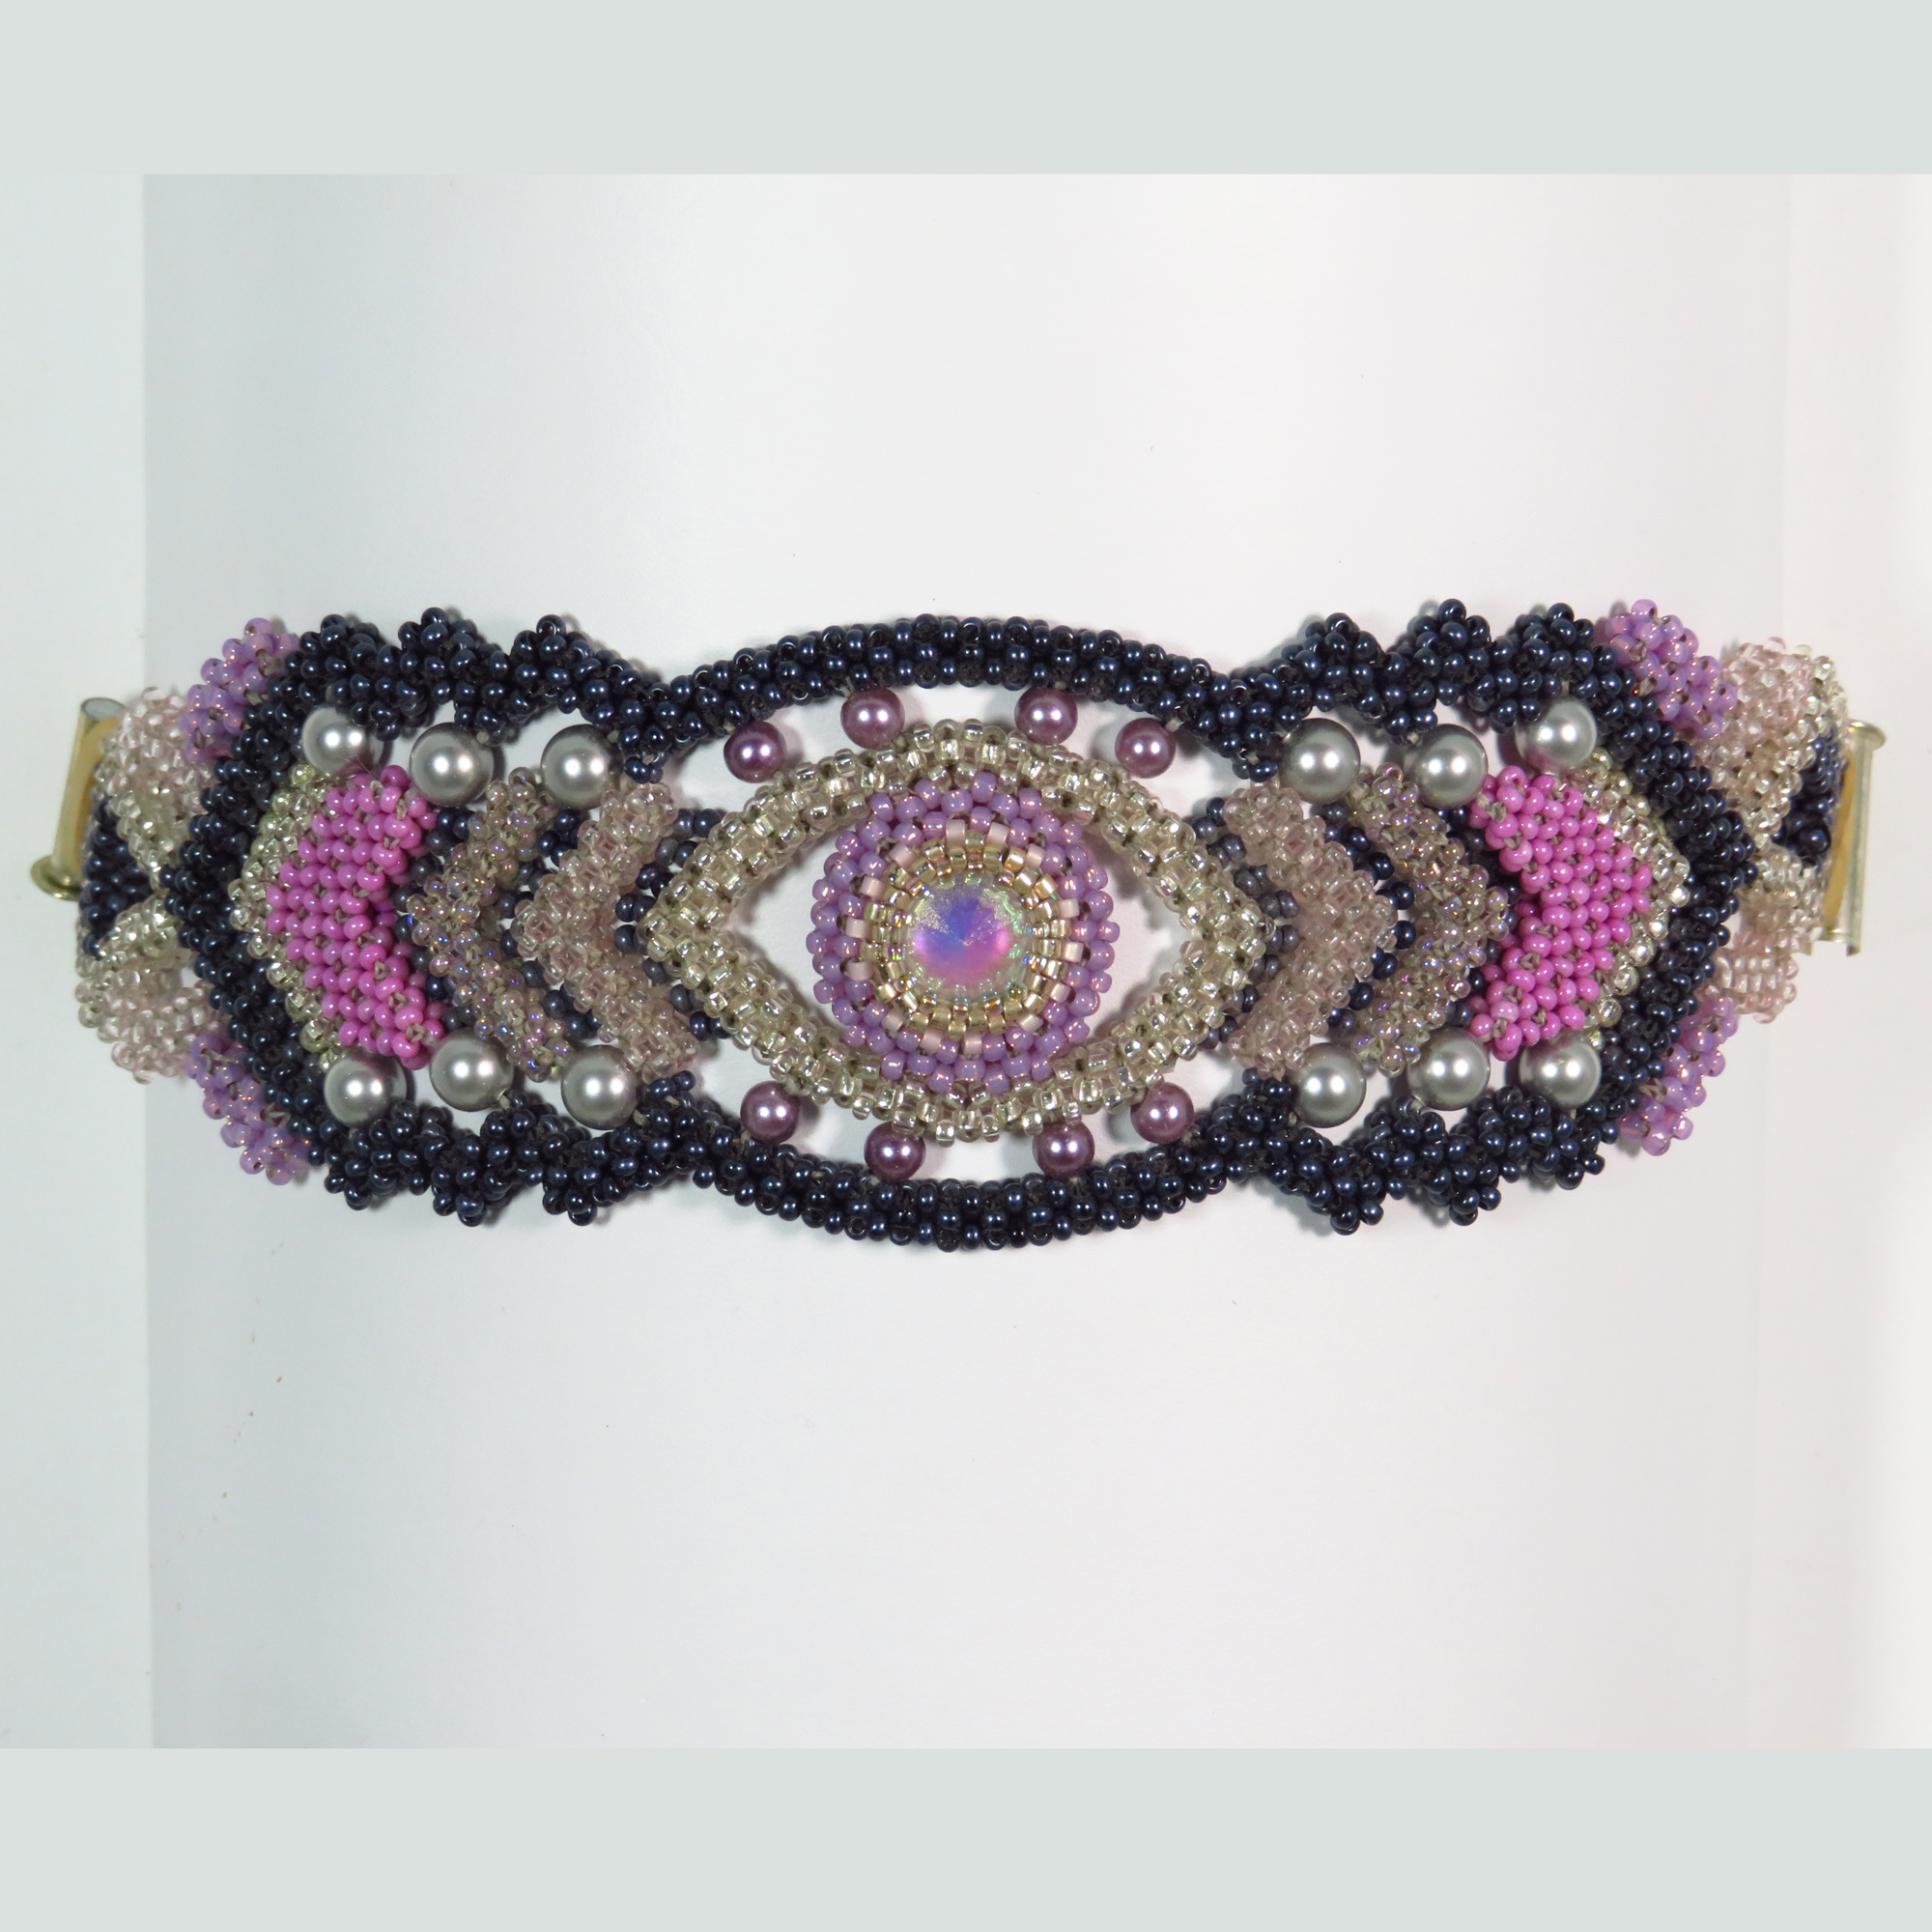 Intricate purple beaded right angle weave cuff bracelet by Bonnie Van Hall